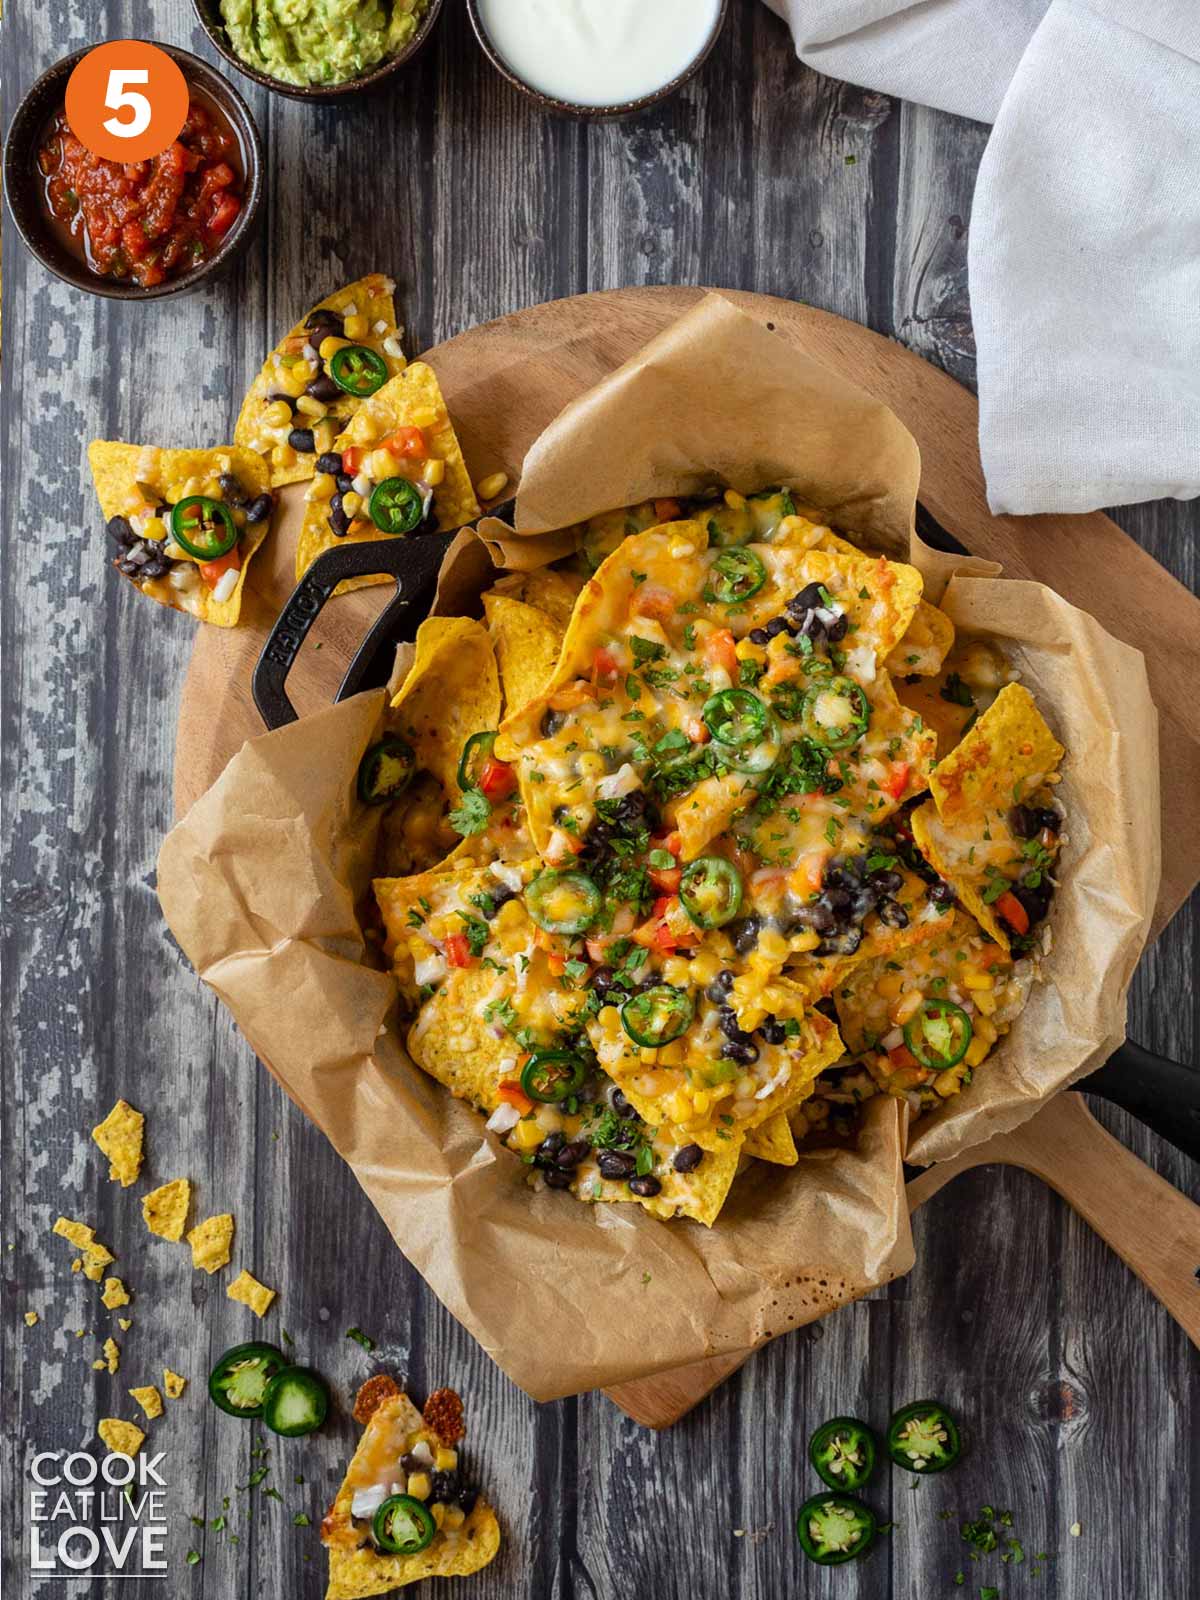 Tortilla chips layered with veggies and beans for vegetarian nachos.